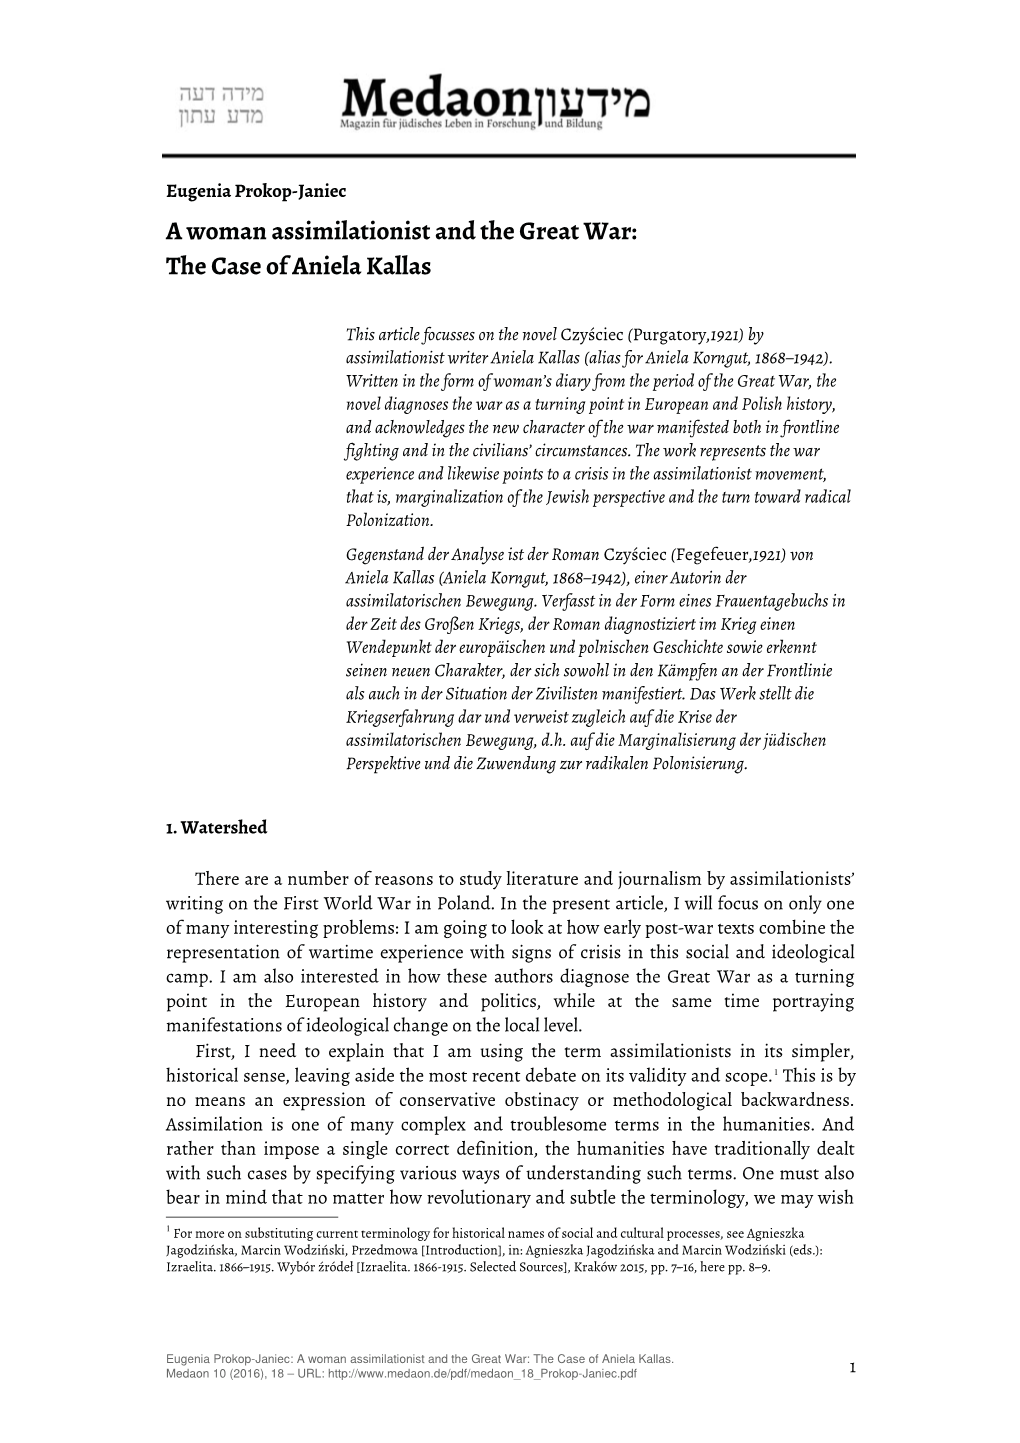 A Woman Assimilationist and the Great War: the Case of Aniela Kallas